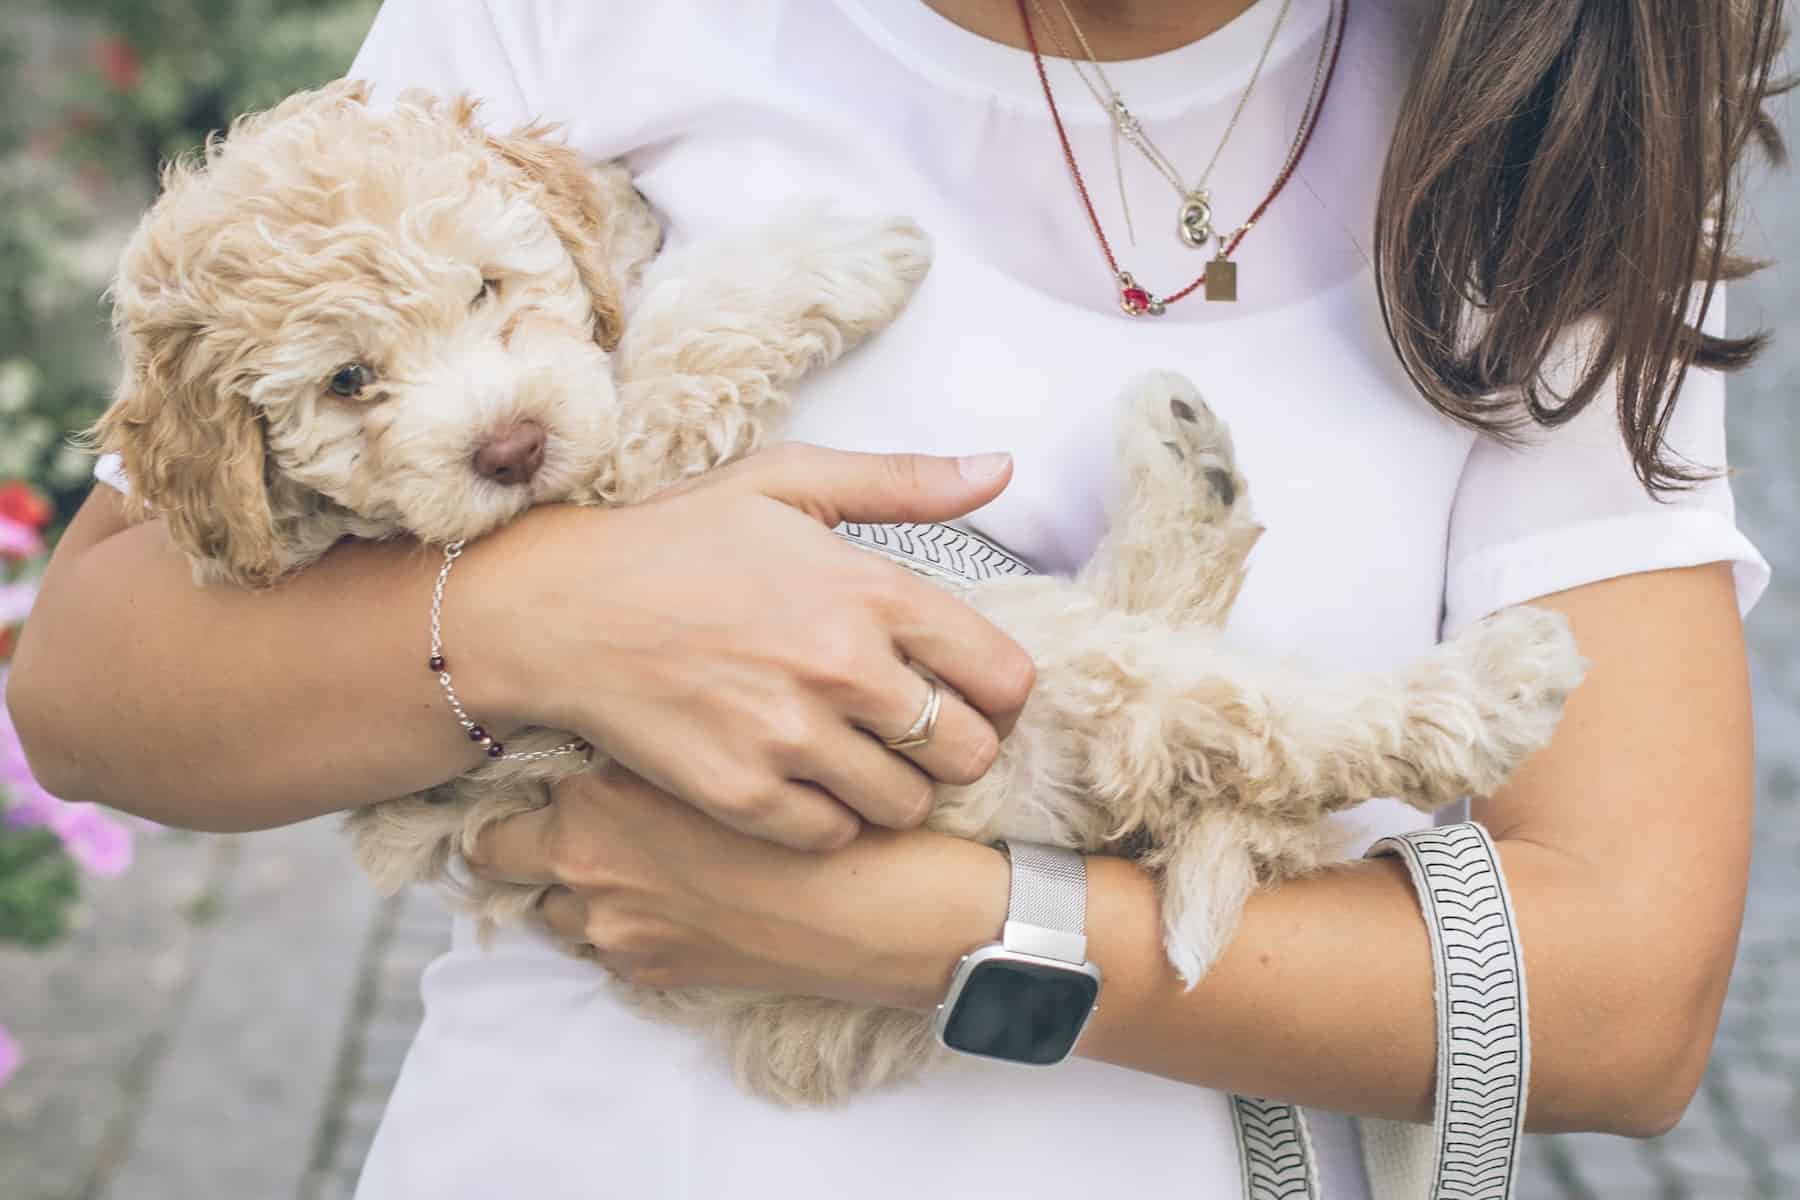 women holding a cockapoo puppy